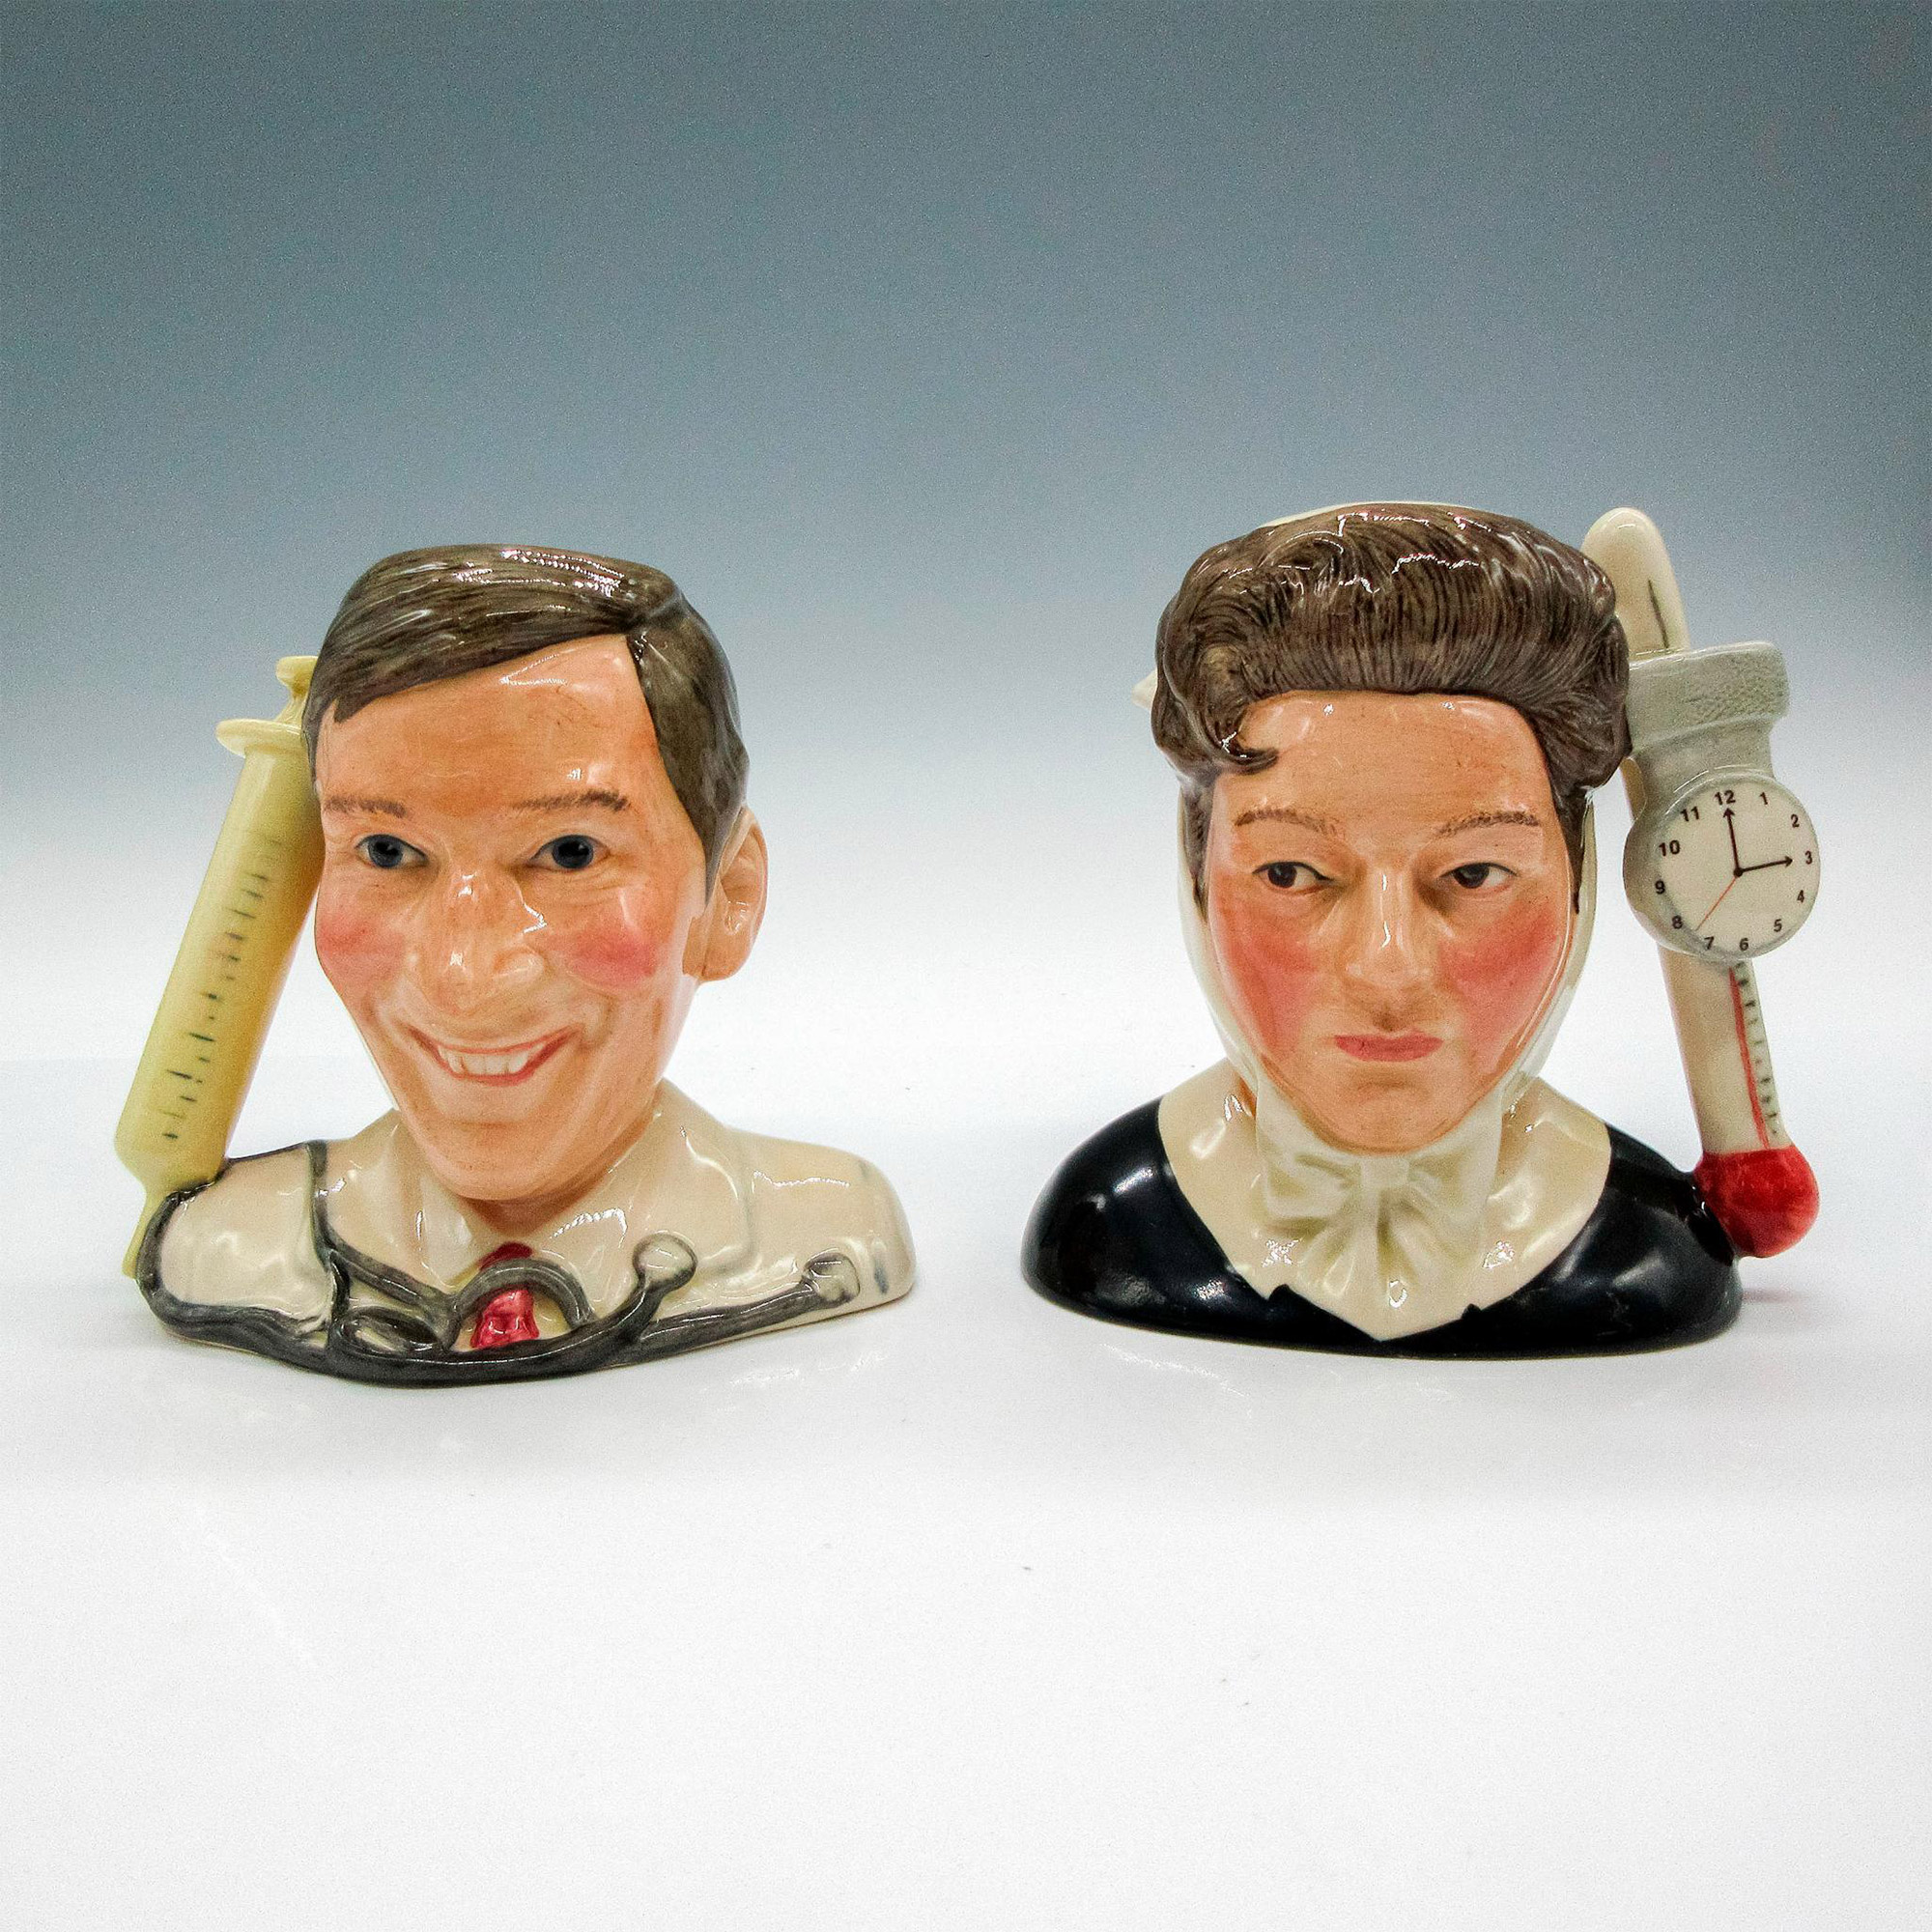 Hattie Jacques as Matron & Kenneth Williams as Dr. Tinkle D7172 & D7173 - Small - Royal Doulton Char